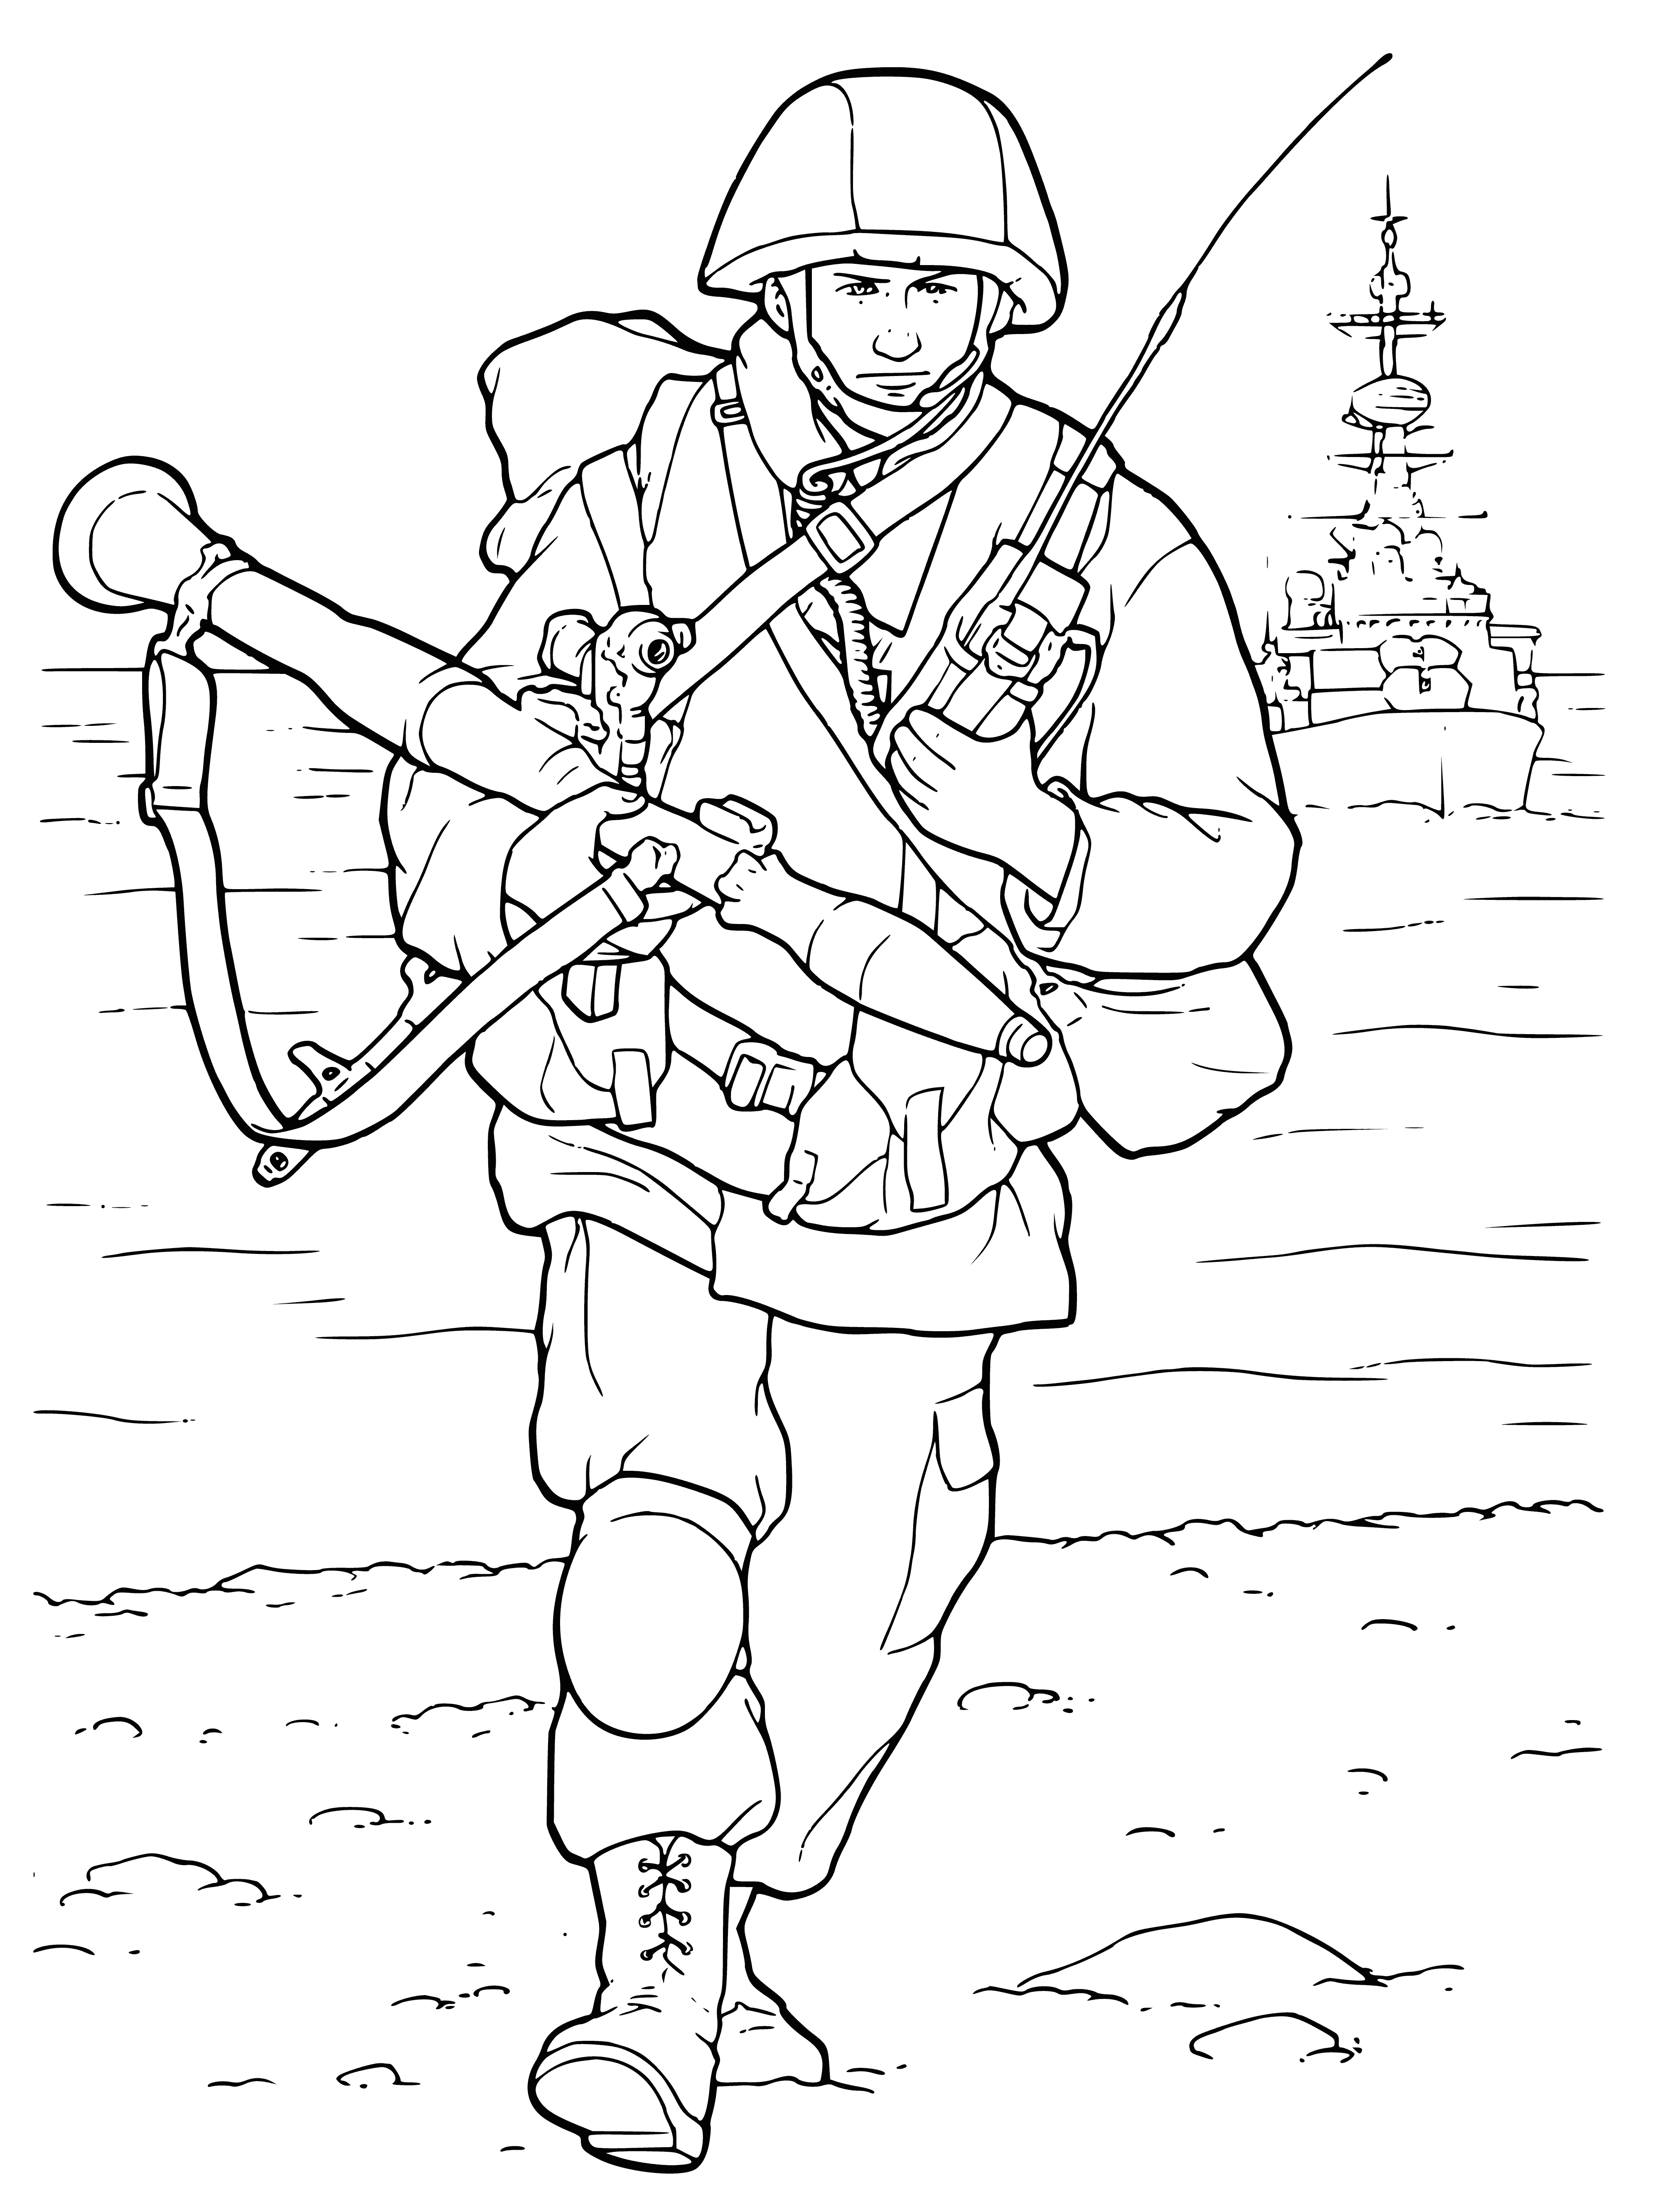 coloring page: Troops in camo stand in wooded area with rifles & packs, ready for action.